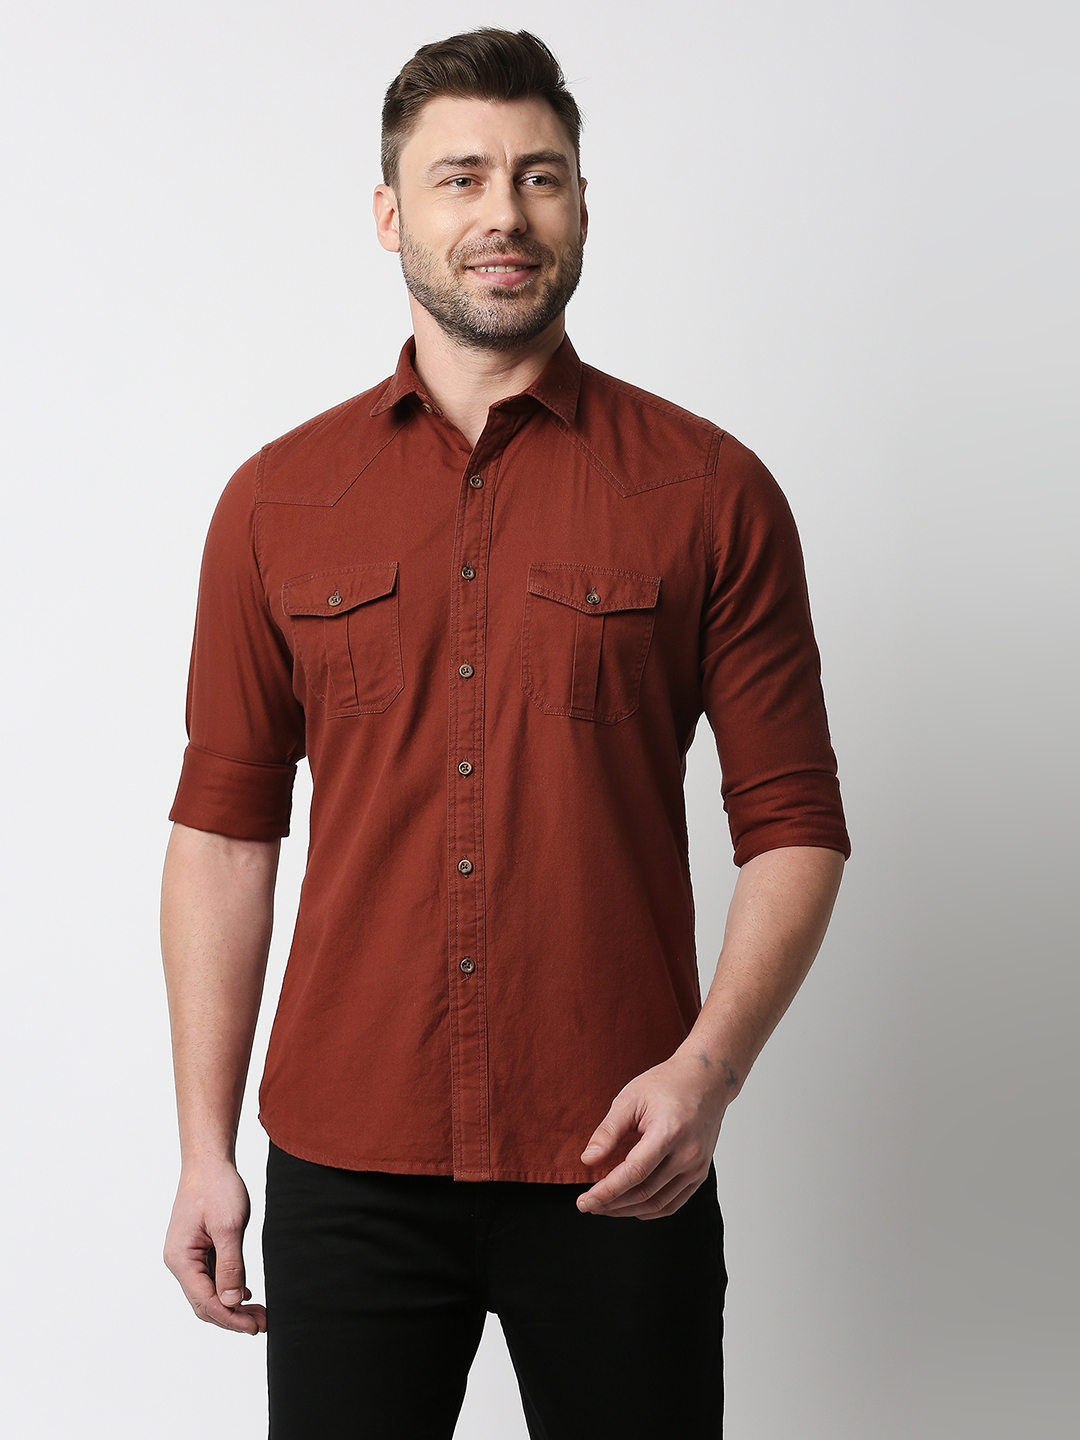 EVOQ | EVOQ's Rust Full Sleeves Cotton Casual Shirt with Double Flap Pocket for Men